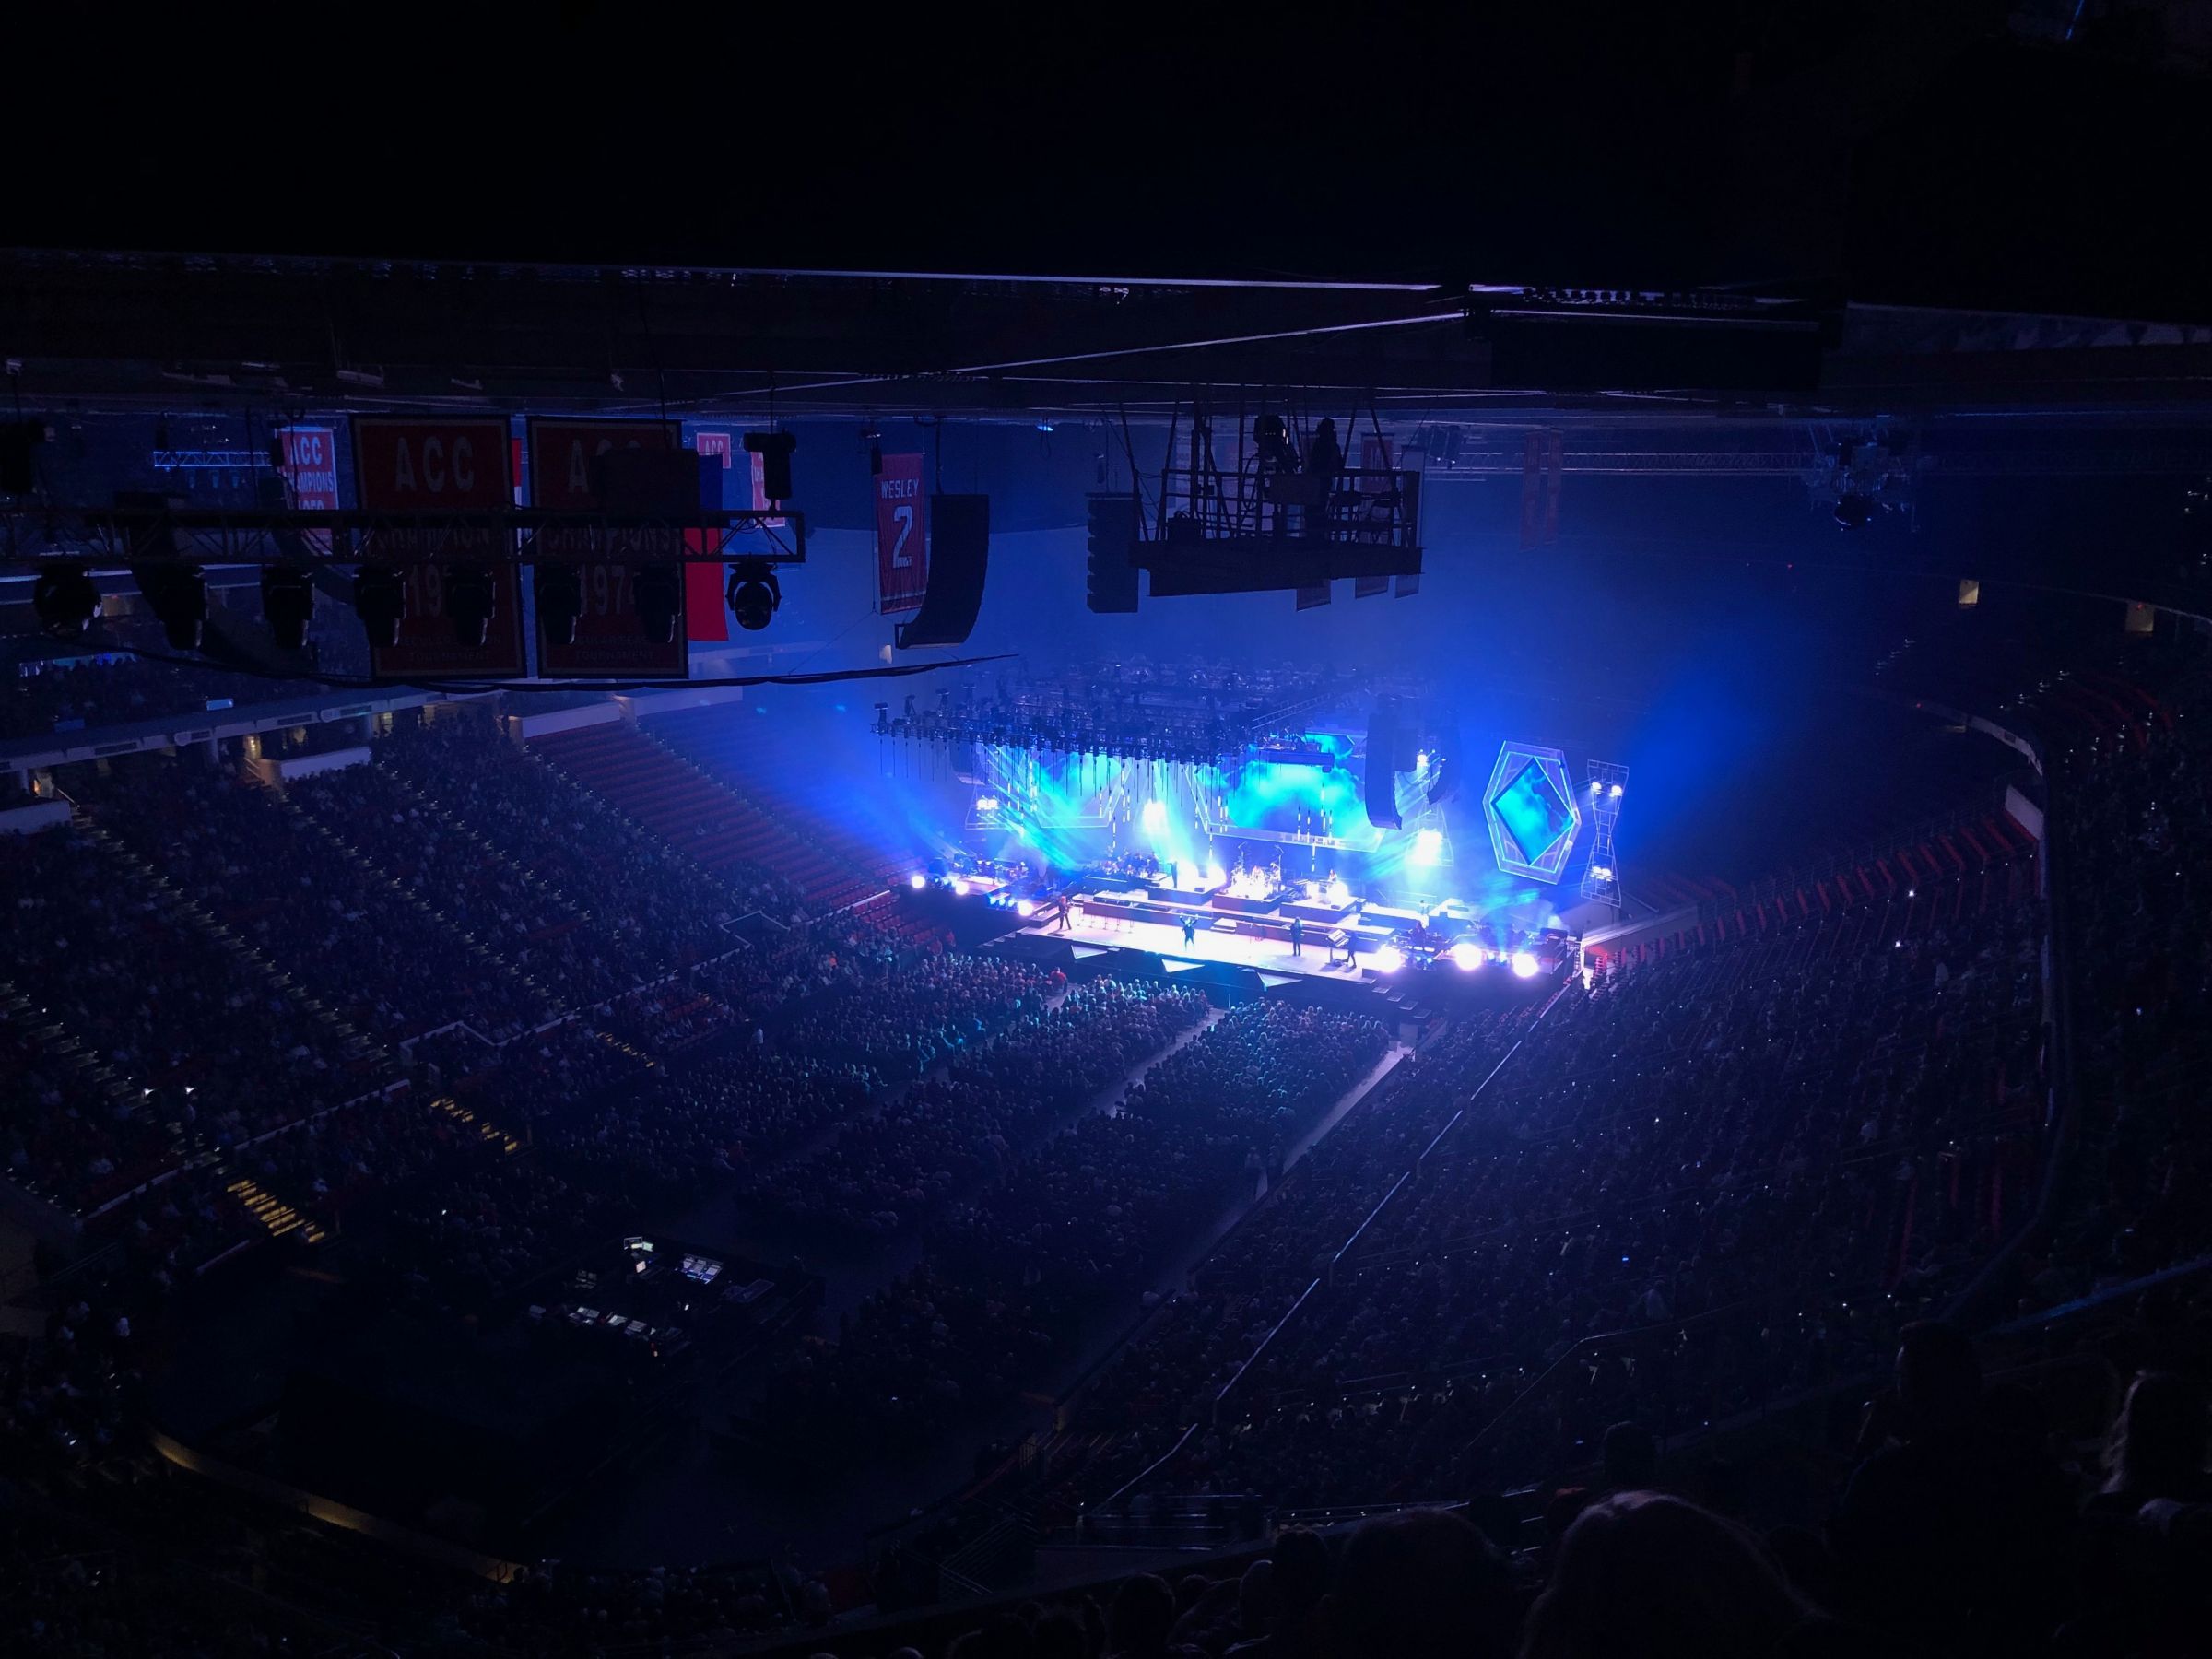 section 330, row k seat view  for concert - pnc arena